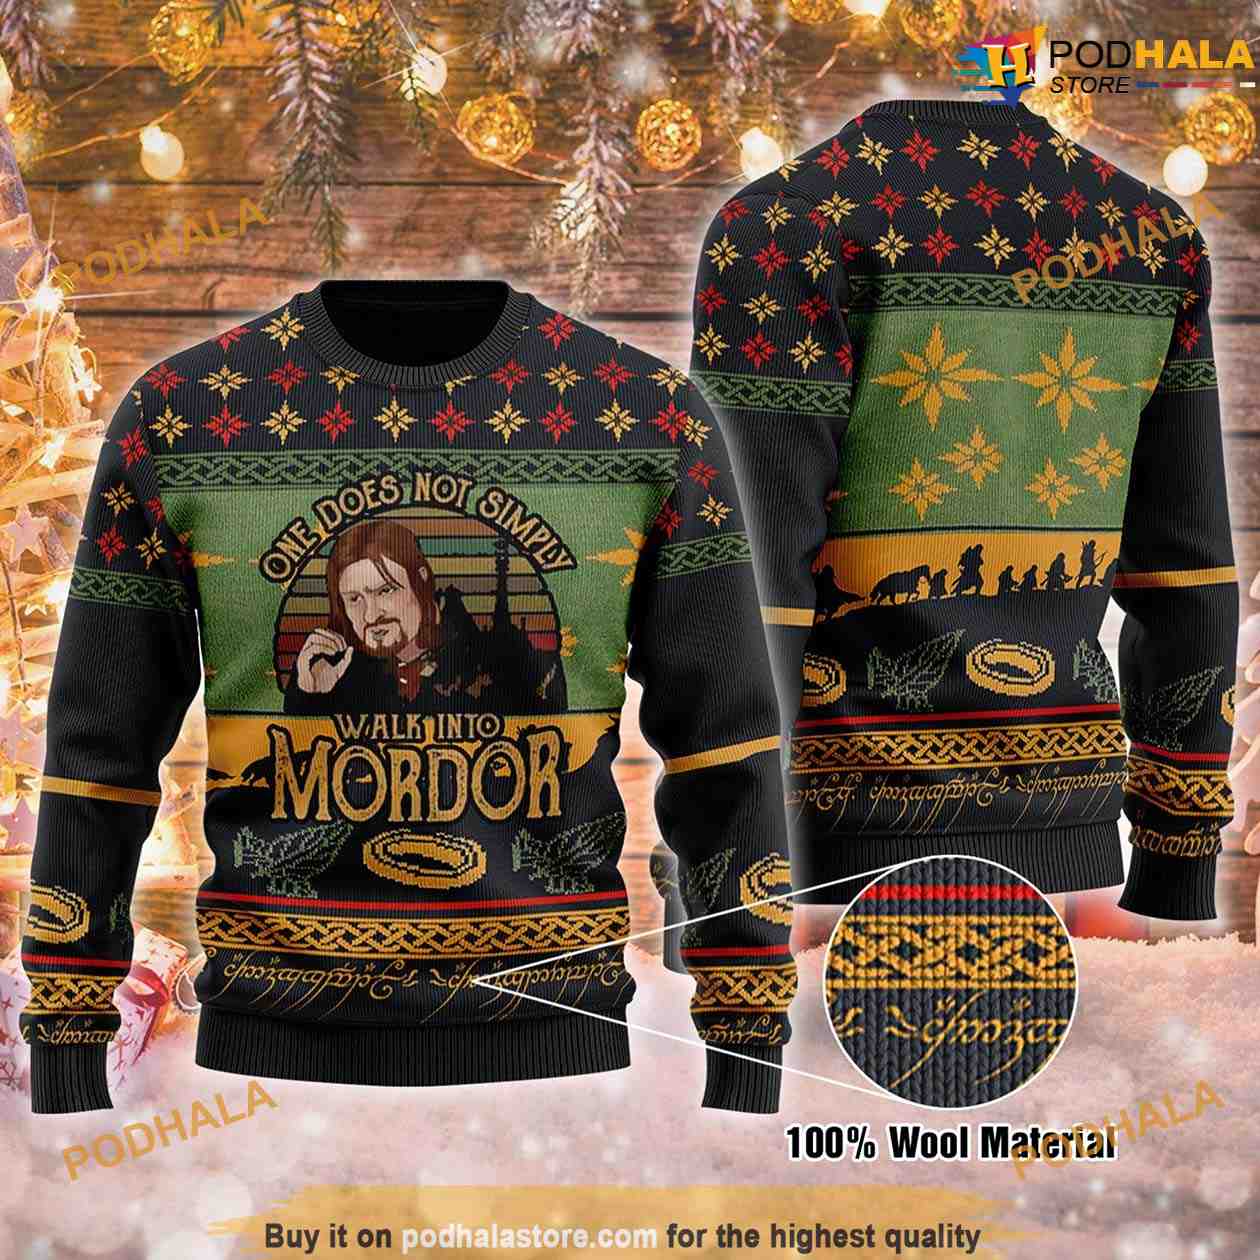 Lotr One Does Not Simply Walk Into Morder 3D Baseball Jersey - Bring Your  Ideas, Thoughts And Imaginations Into Reality Today